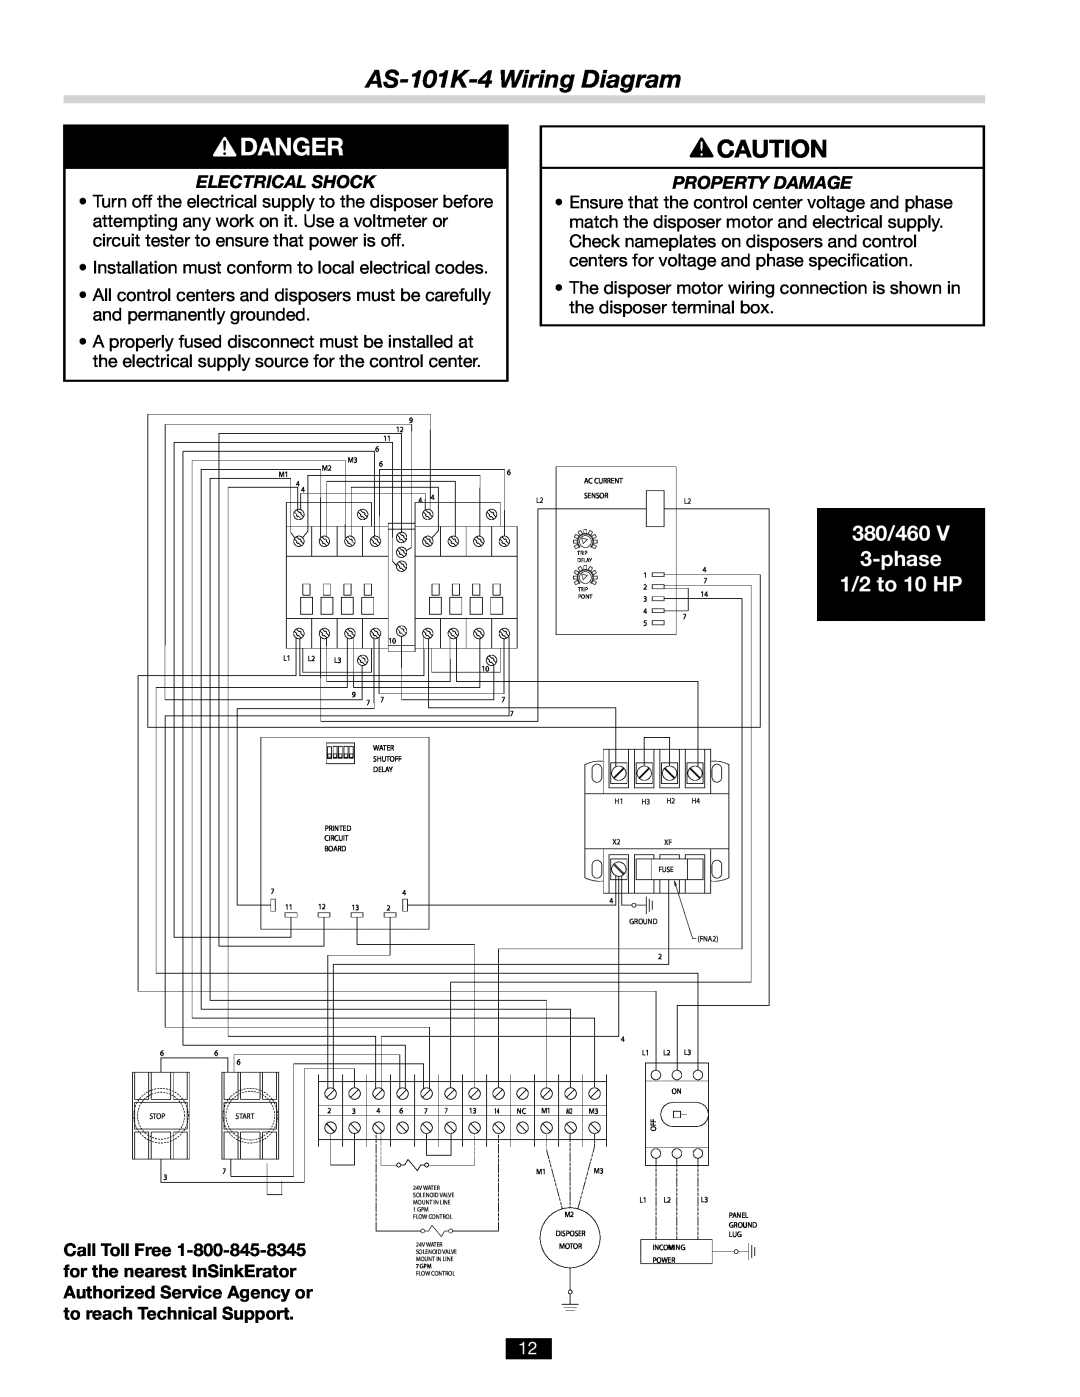 InSinkErator AS-101K-4 Wiring Diagram, 380/460 3-phase 1/2 to 10 HP, Electrical Shock, Property Damage, Call Toll Free 